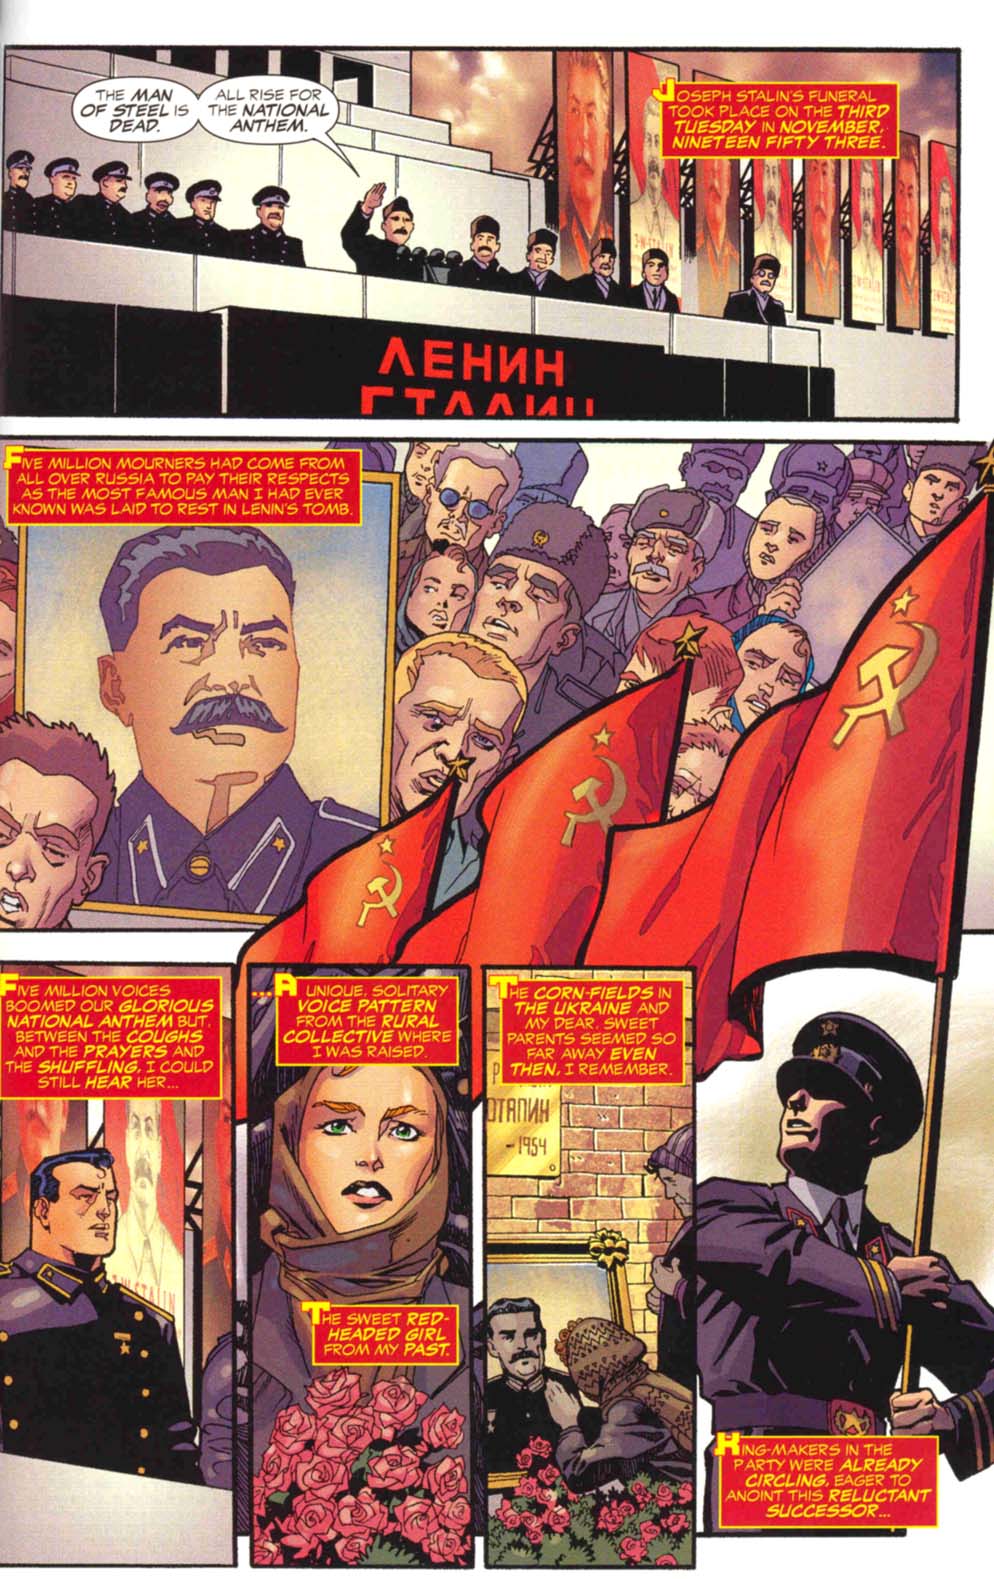 SUPERMAN: RED SON 1